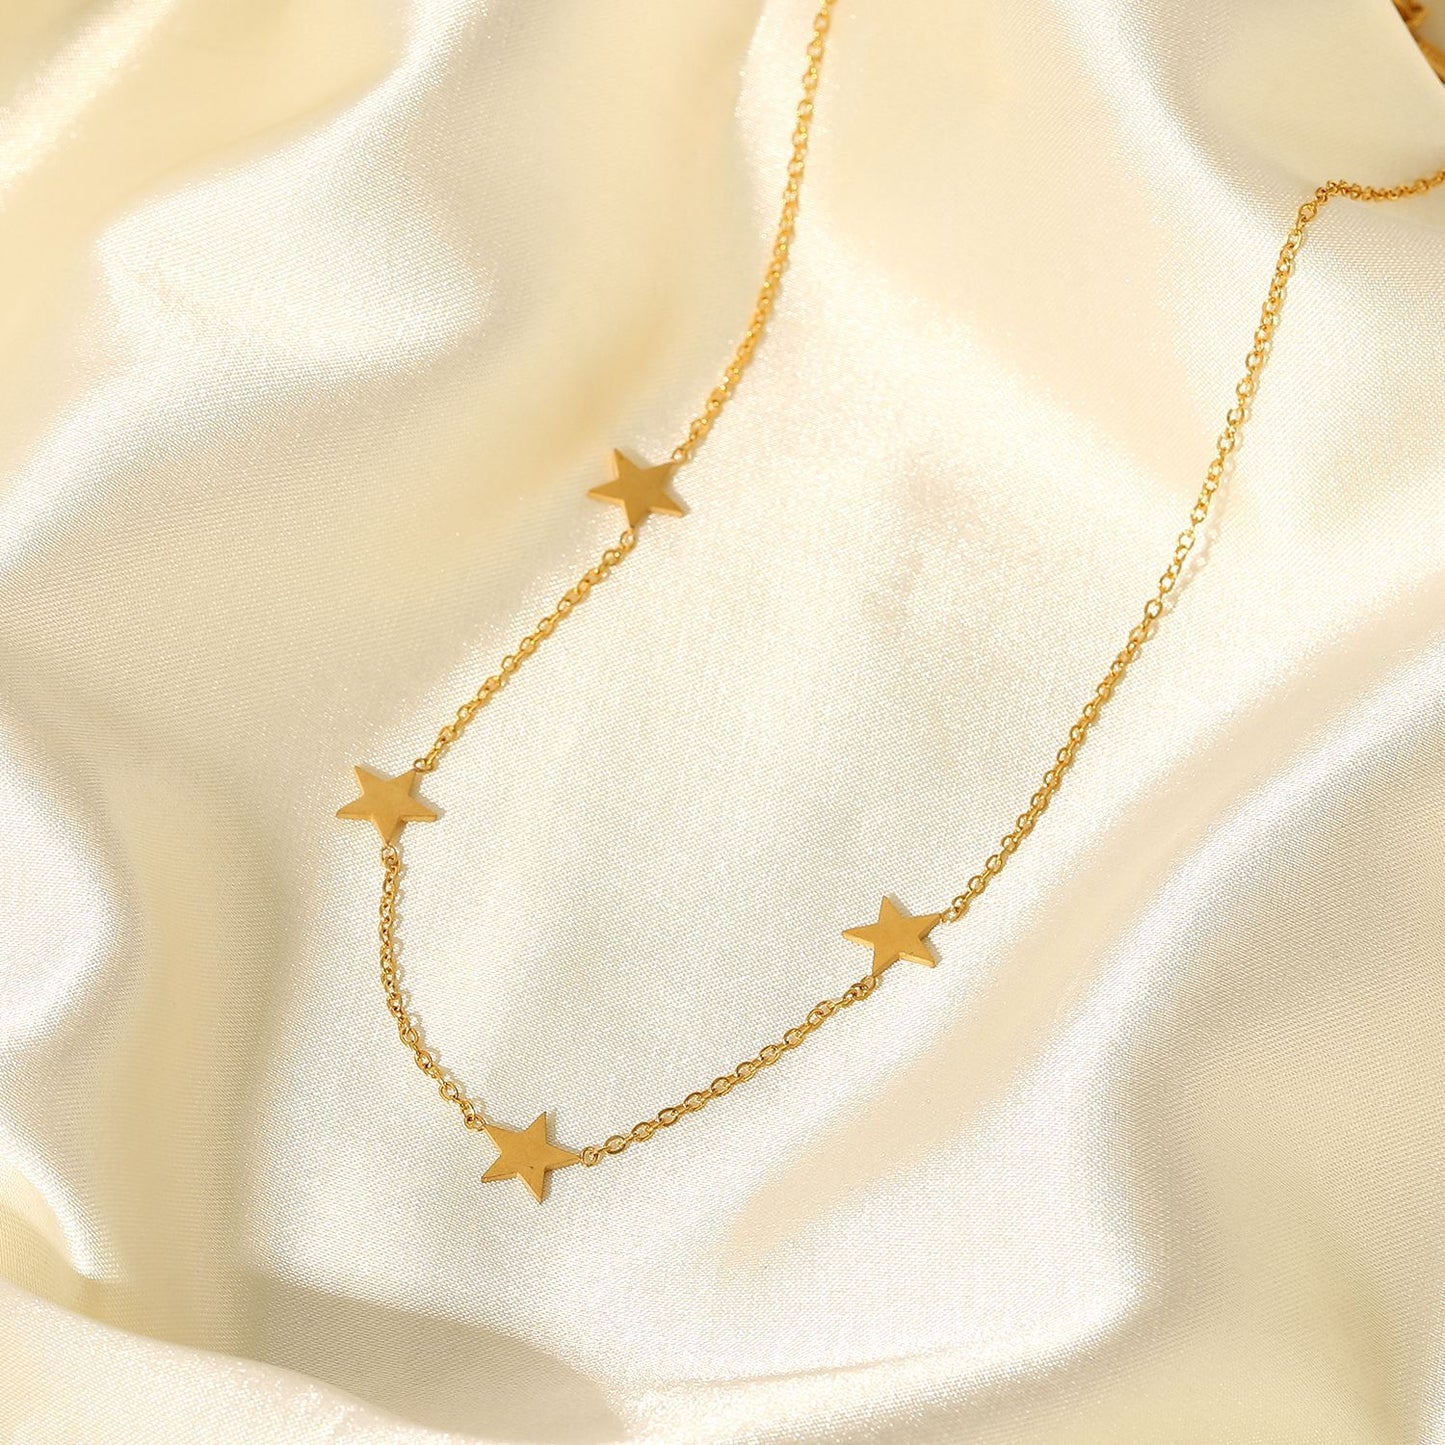 Star chain necklace